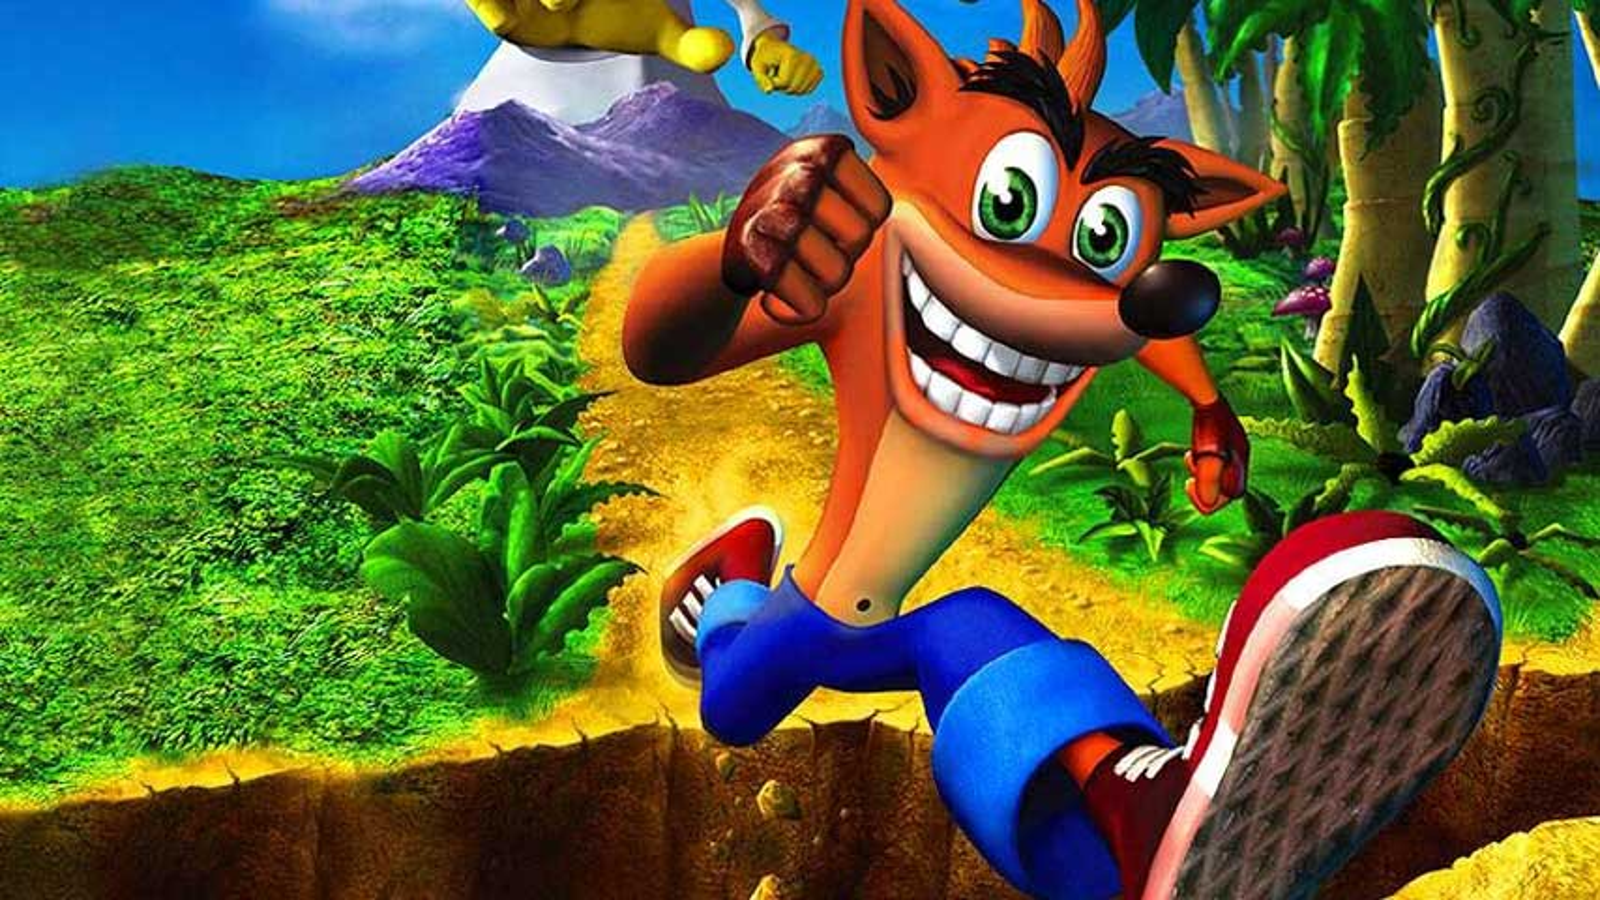 Rumour: A New Crash Bandicoot Game Might Be Revealed Very Soon